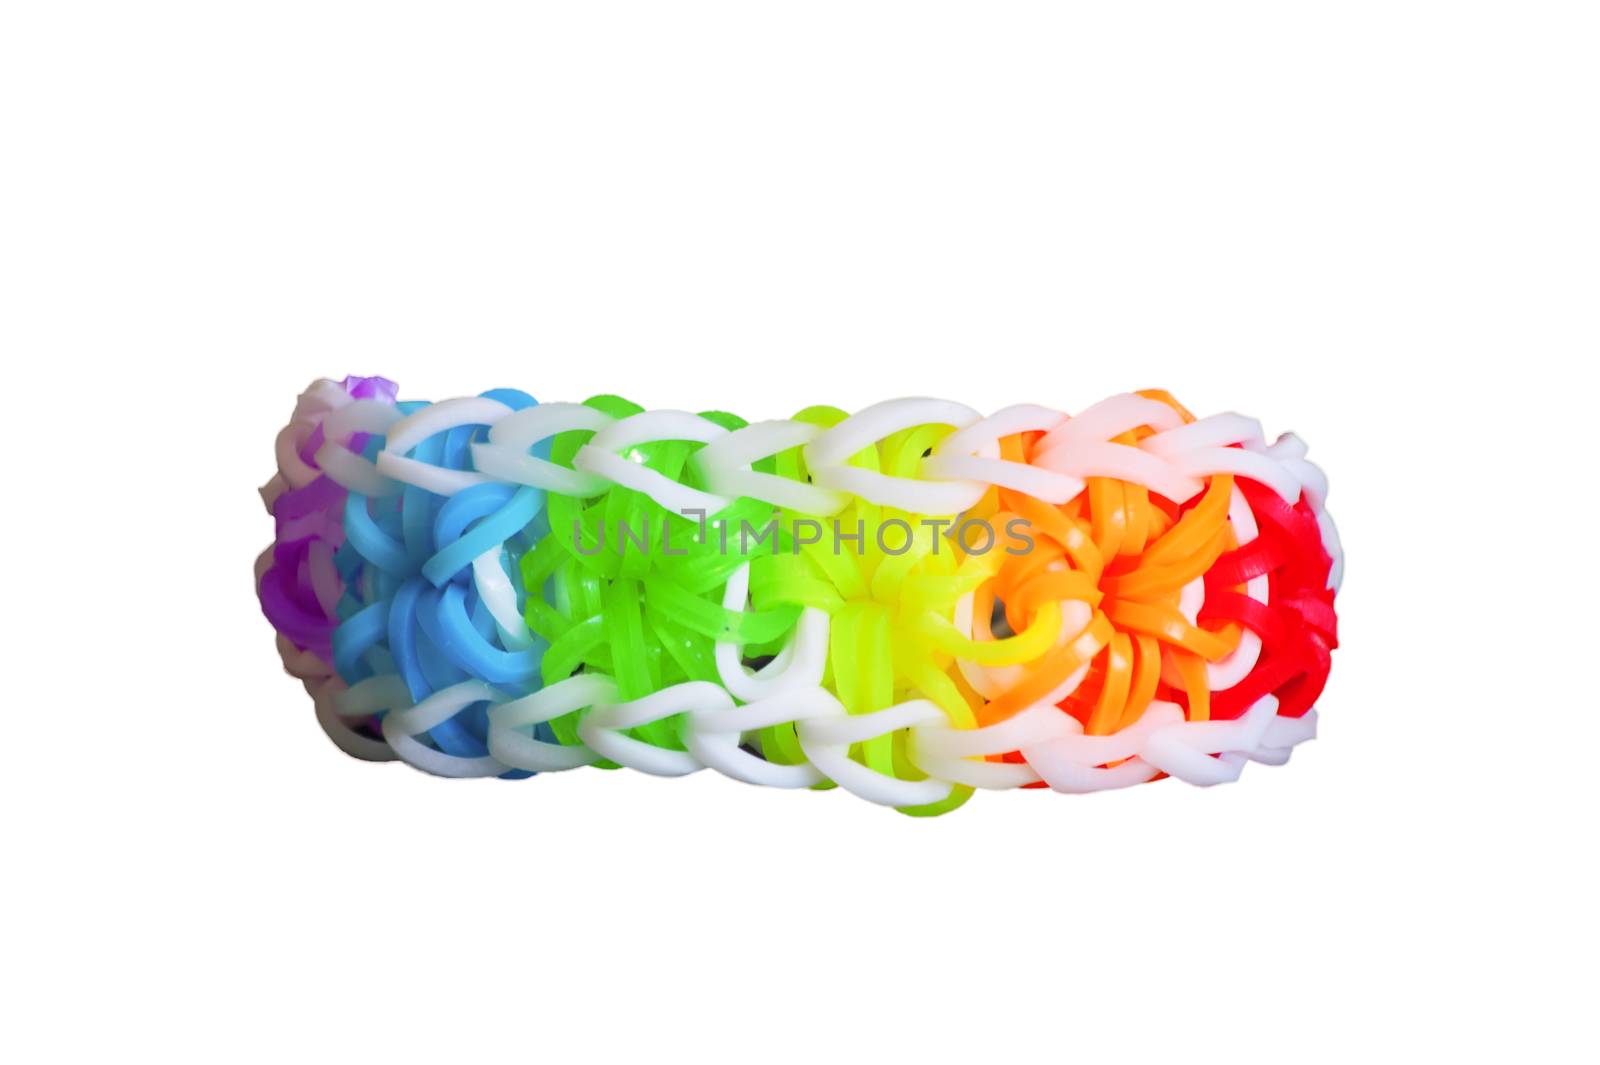 Rainbow loom rubber bands  with colorful fashion bracelet